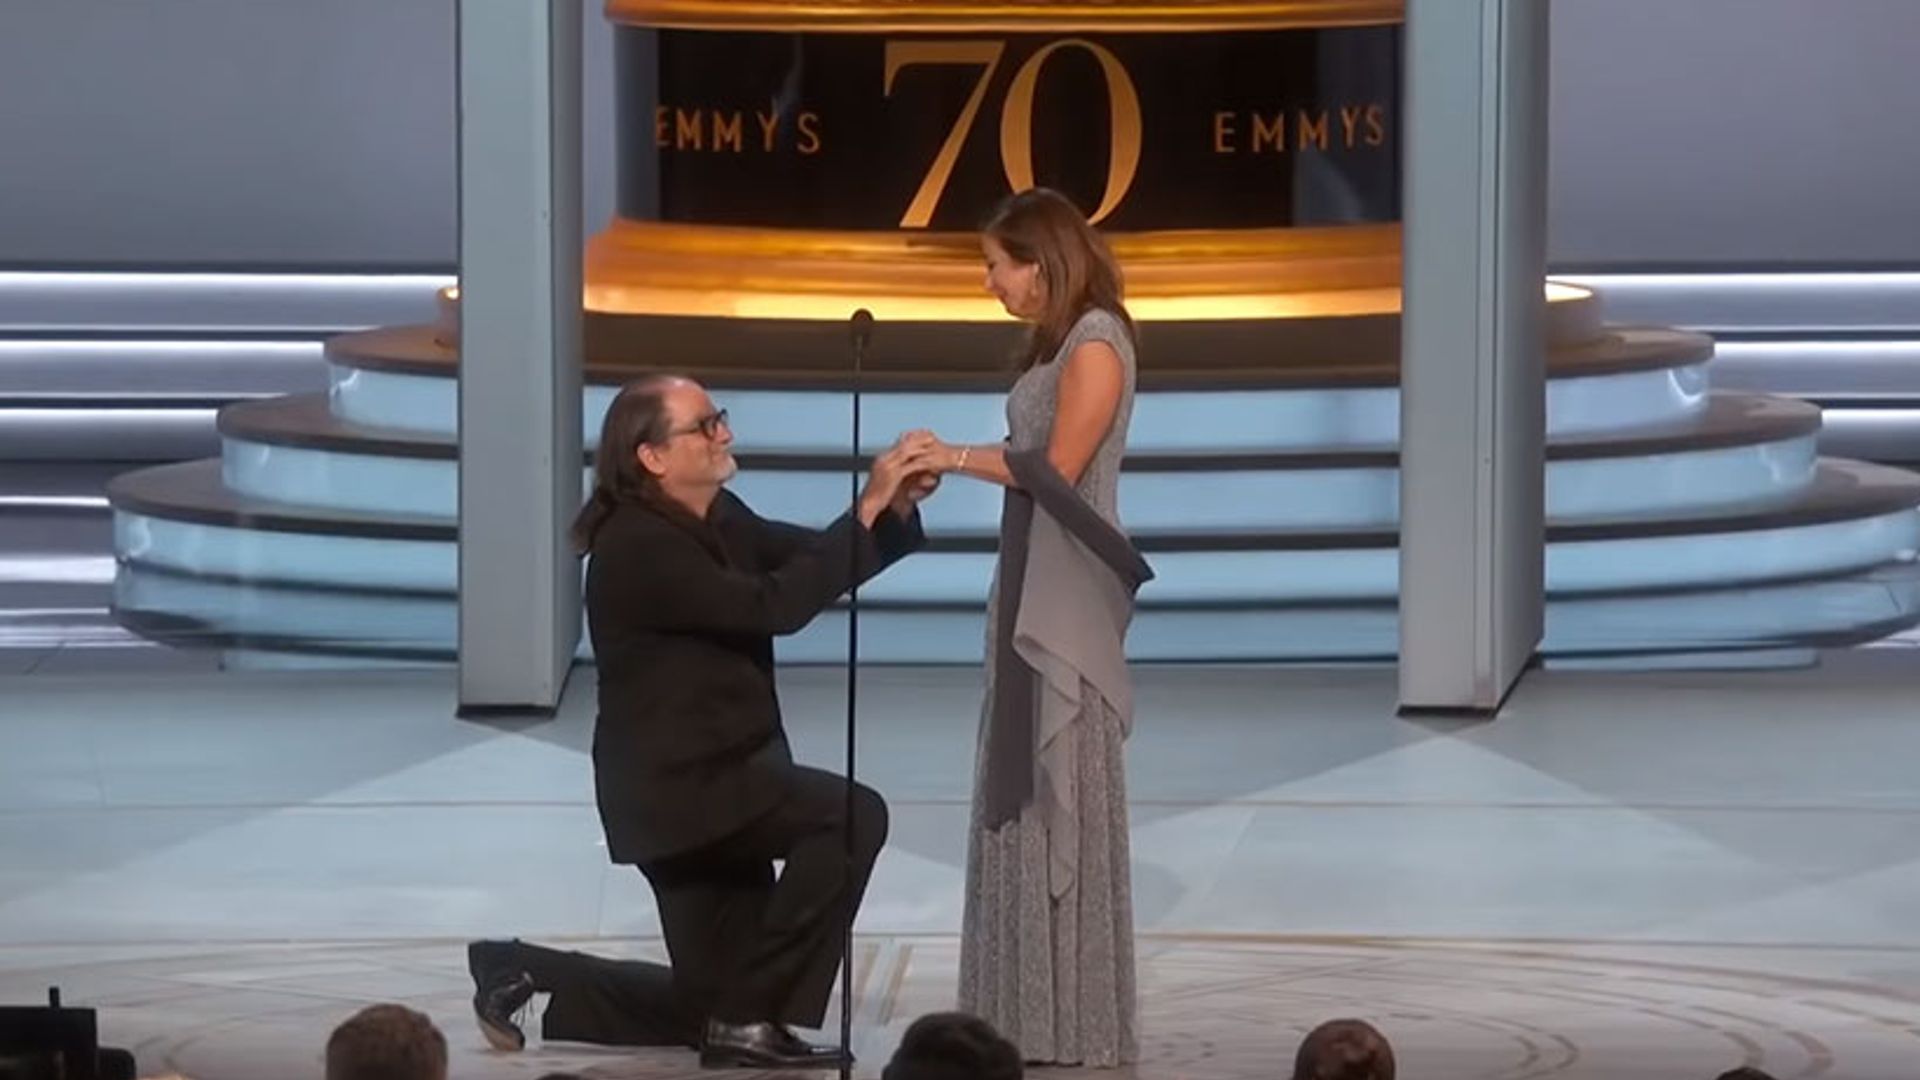 A director proposed at the Emmy Awards last night - and there wasn't a dry eye in the house - VIDEO